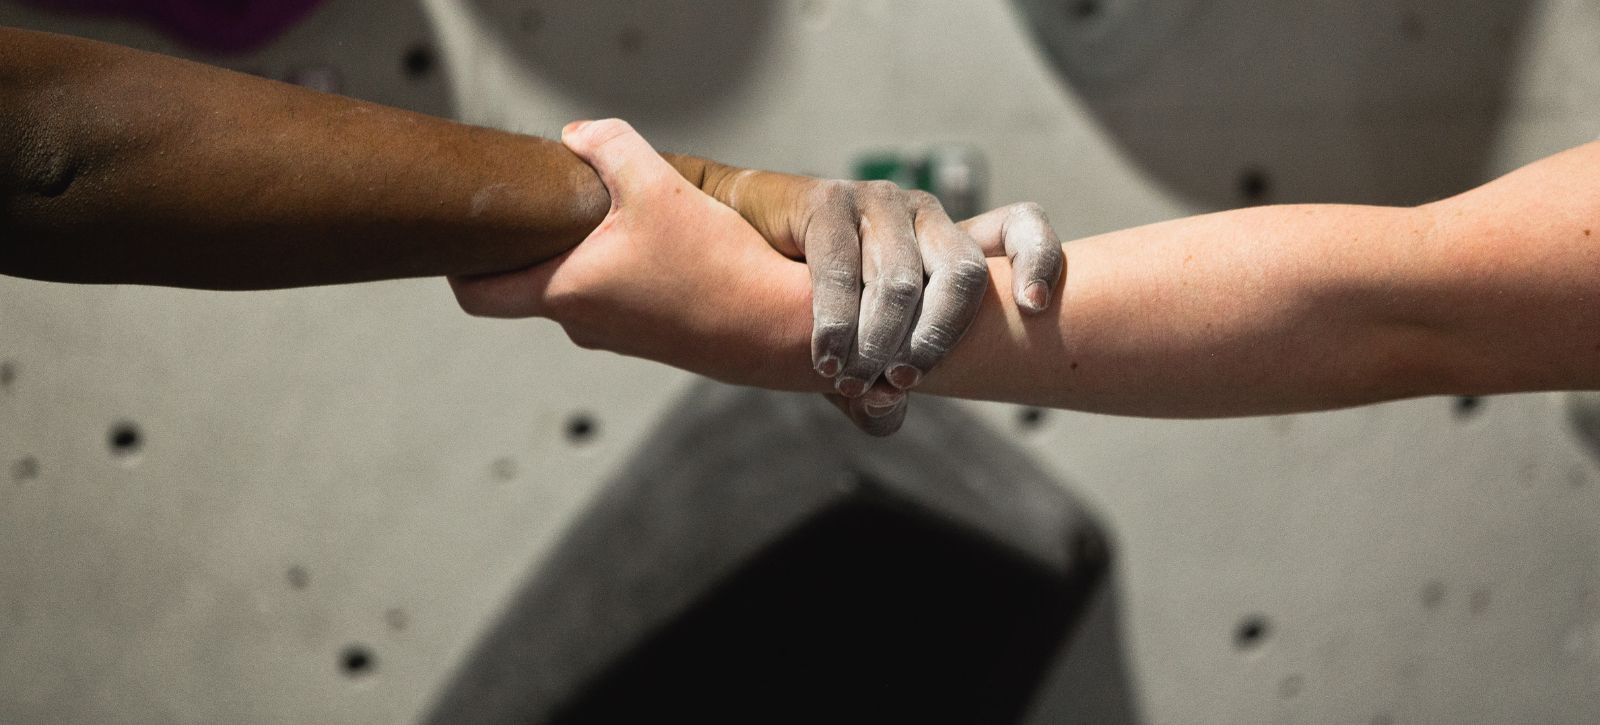 A person of colour holds hands with a white person while climbing the buddy challenge. We can see their hands and a climbing wall in the background.